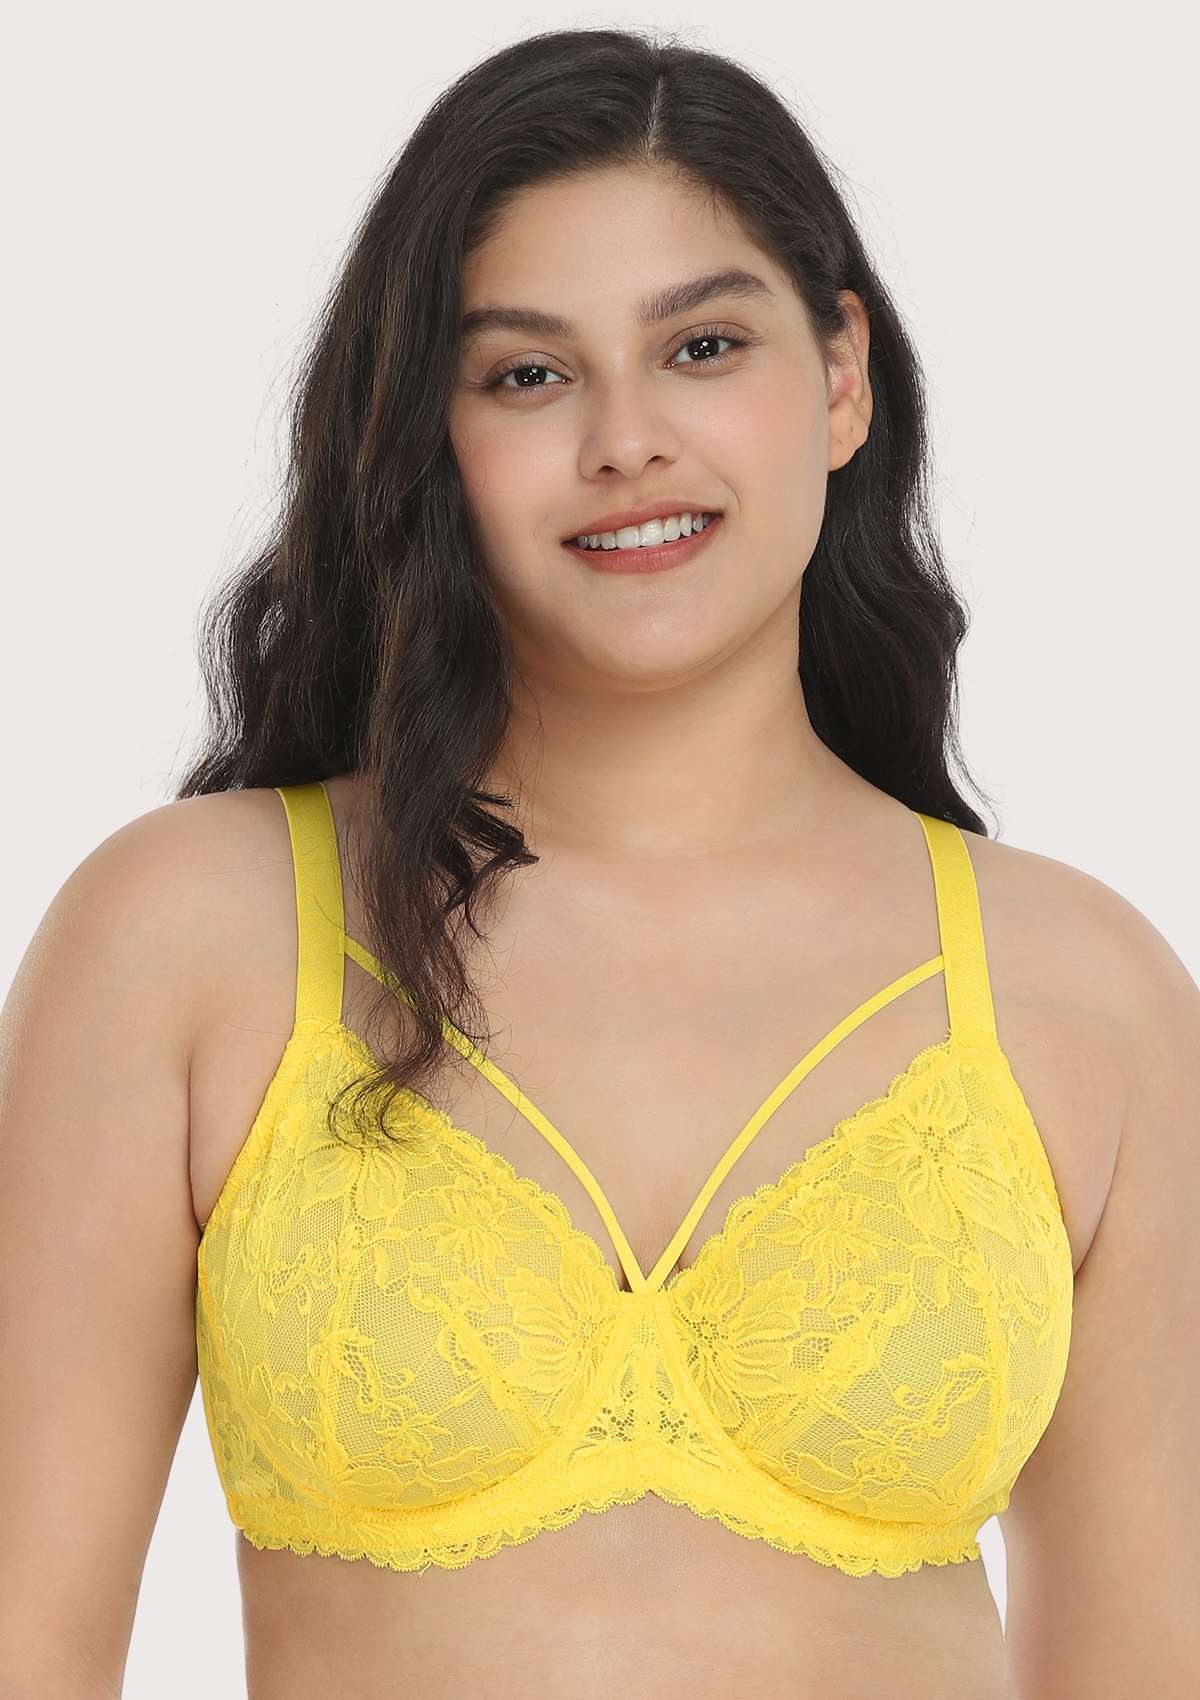 HSIA Unlined Lace Mesh Minimizer Bra For Large Breasts, Full Coverage - Bright Green / 44 / C